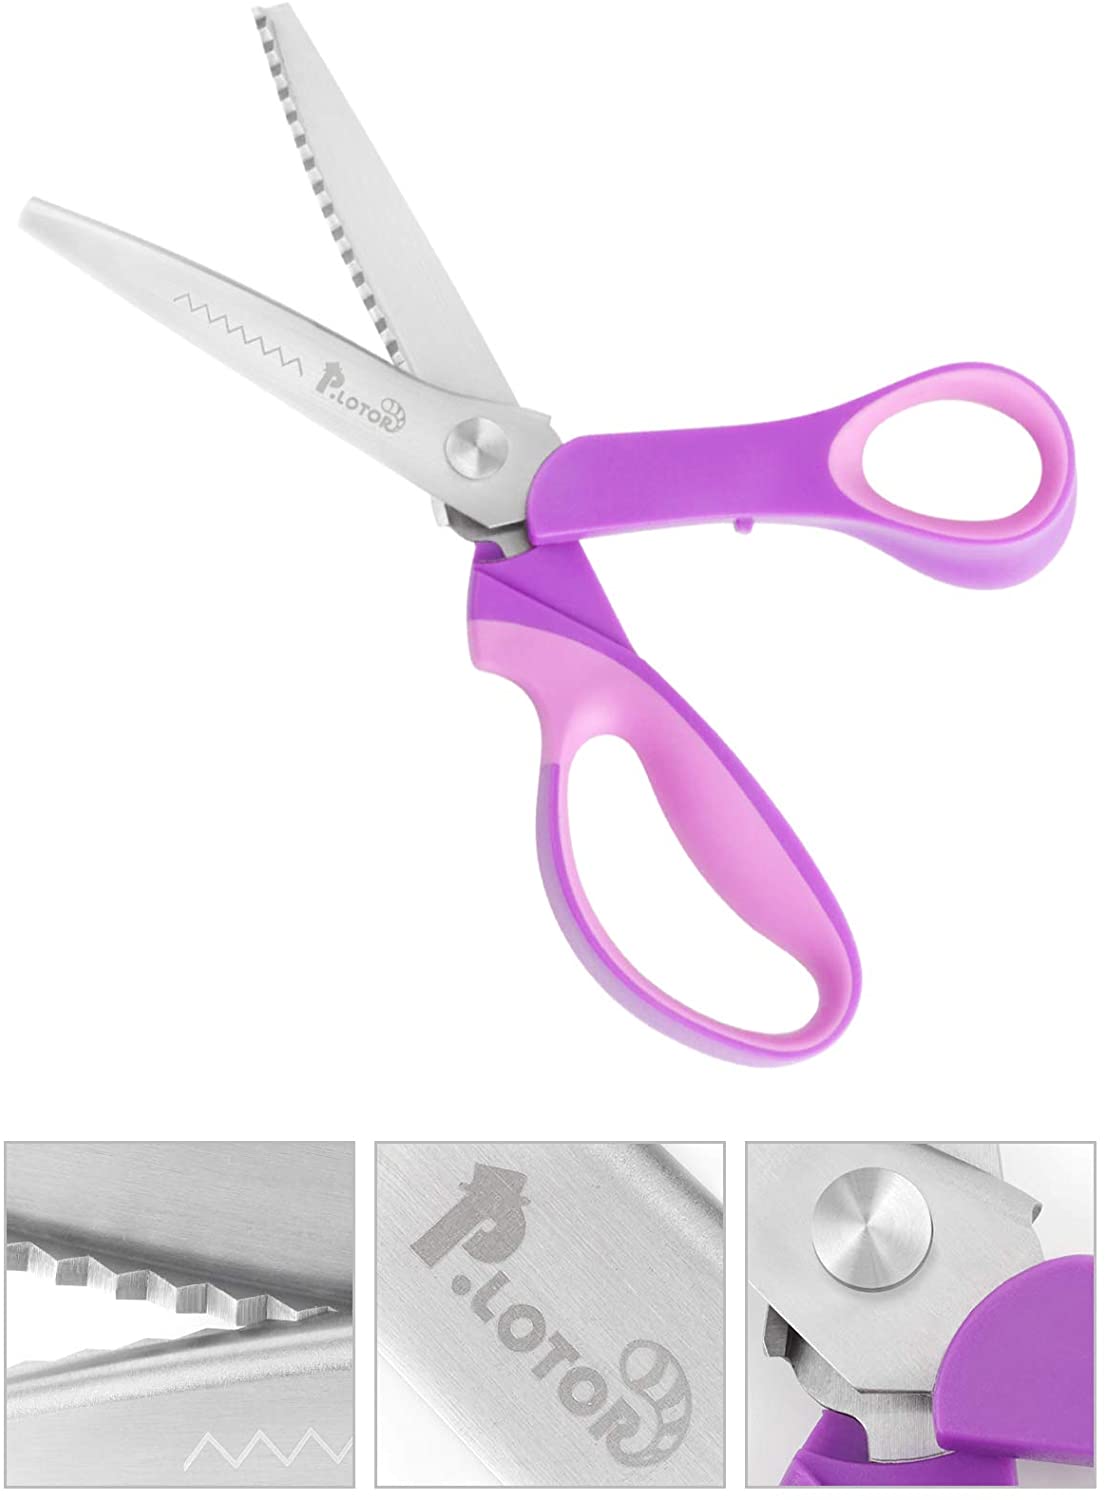 Sewing Pinking Shears for Fabric Paper Leather Professional Craft Scissors with Sharp Stainless Steel Blades, P.LOTOR Lightweight Serrated Scissors with Comfortable Handle 9.3 Inch - (For 1 piece(s))